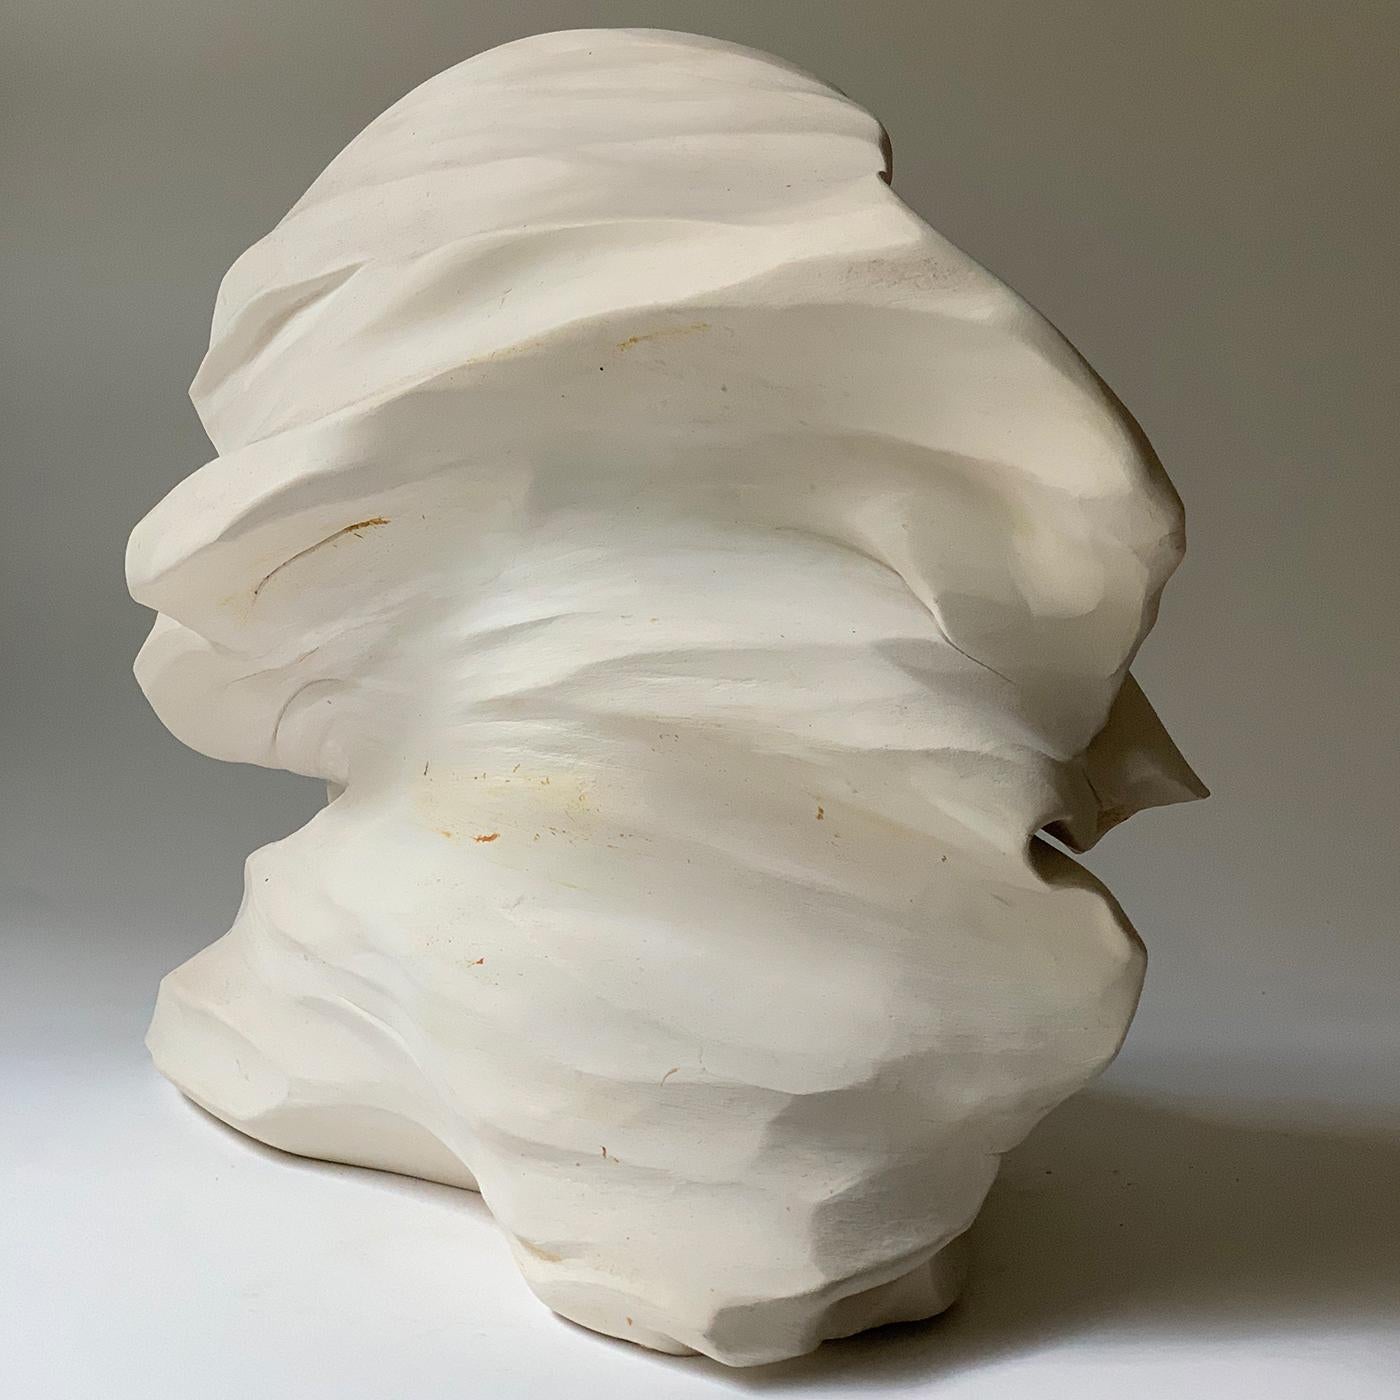 A two-faced sculpture of prevailing convex profile, this extraordinary oeuvre draws inspiration by the movements of the earth, by the fluidity of lava. Painted in white to catch the light at its highest expression, it features a roughly textured